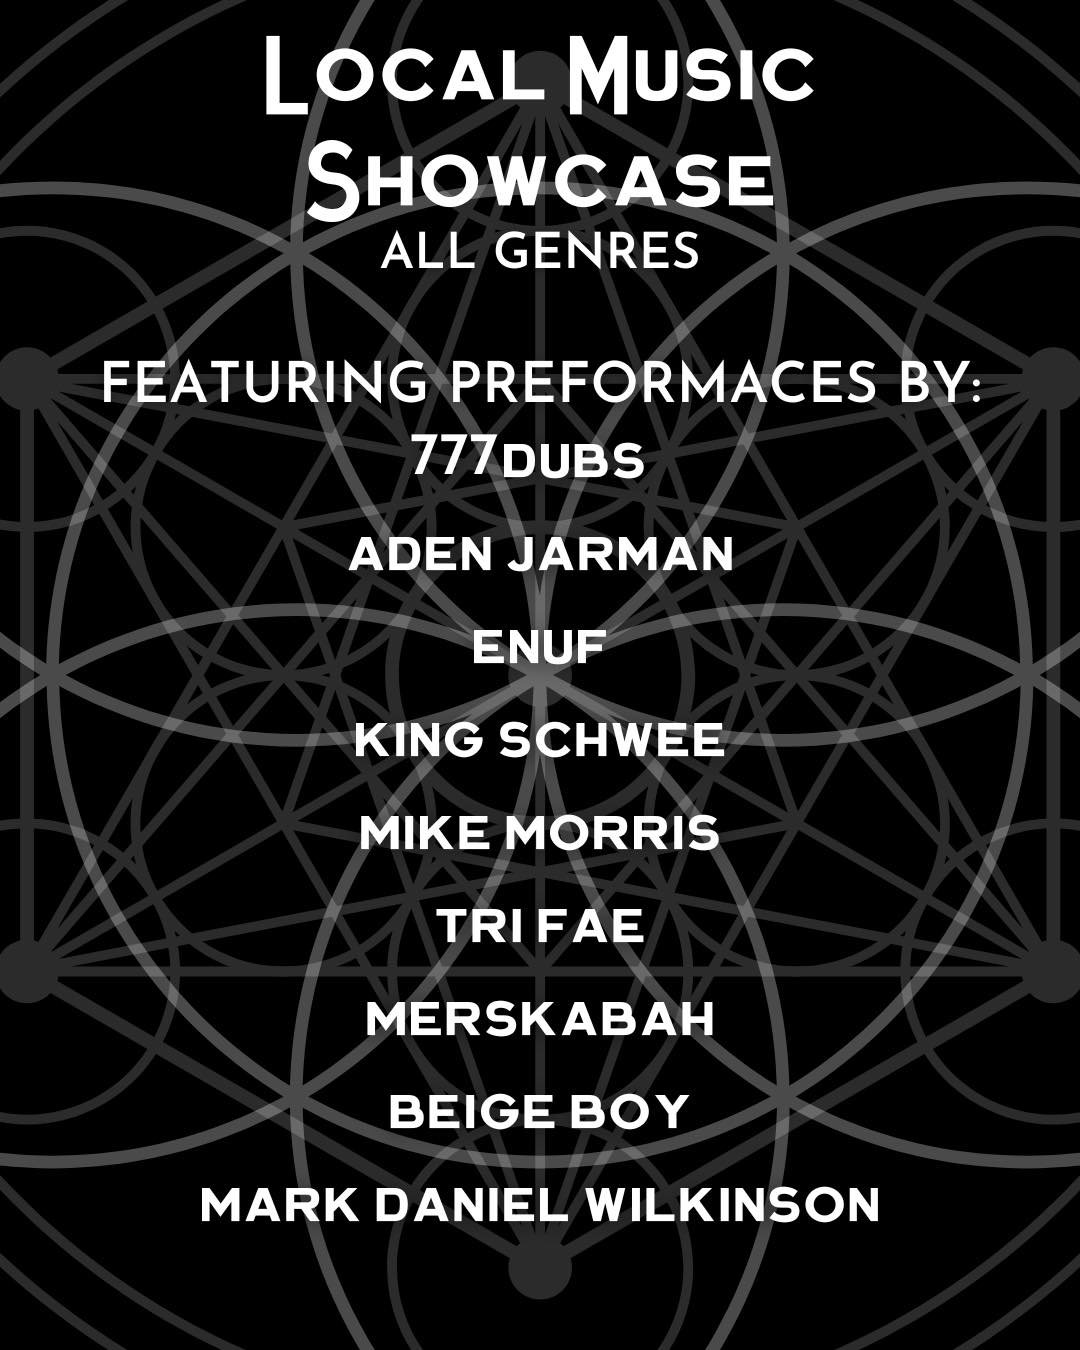 Excited for our upcoming All Genre night for the Local Music Showcase series next Saturday, May 11th? Feelings mutual.🤩 We will be featuring talent from: 777DUBS, Aden Jarman, ENUF, King Schwee, Mike Morris, tri fae, Merskabah, Beige Boy, Mark Danie